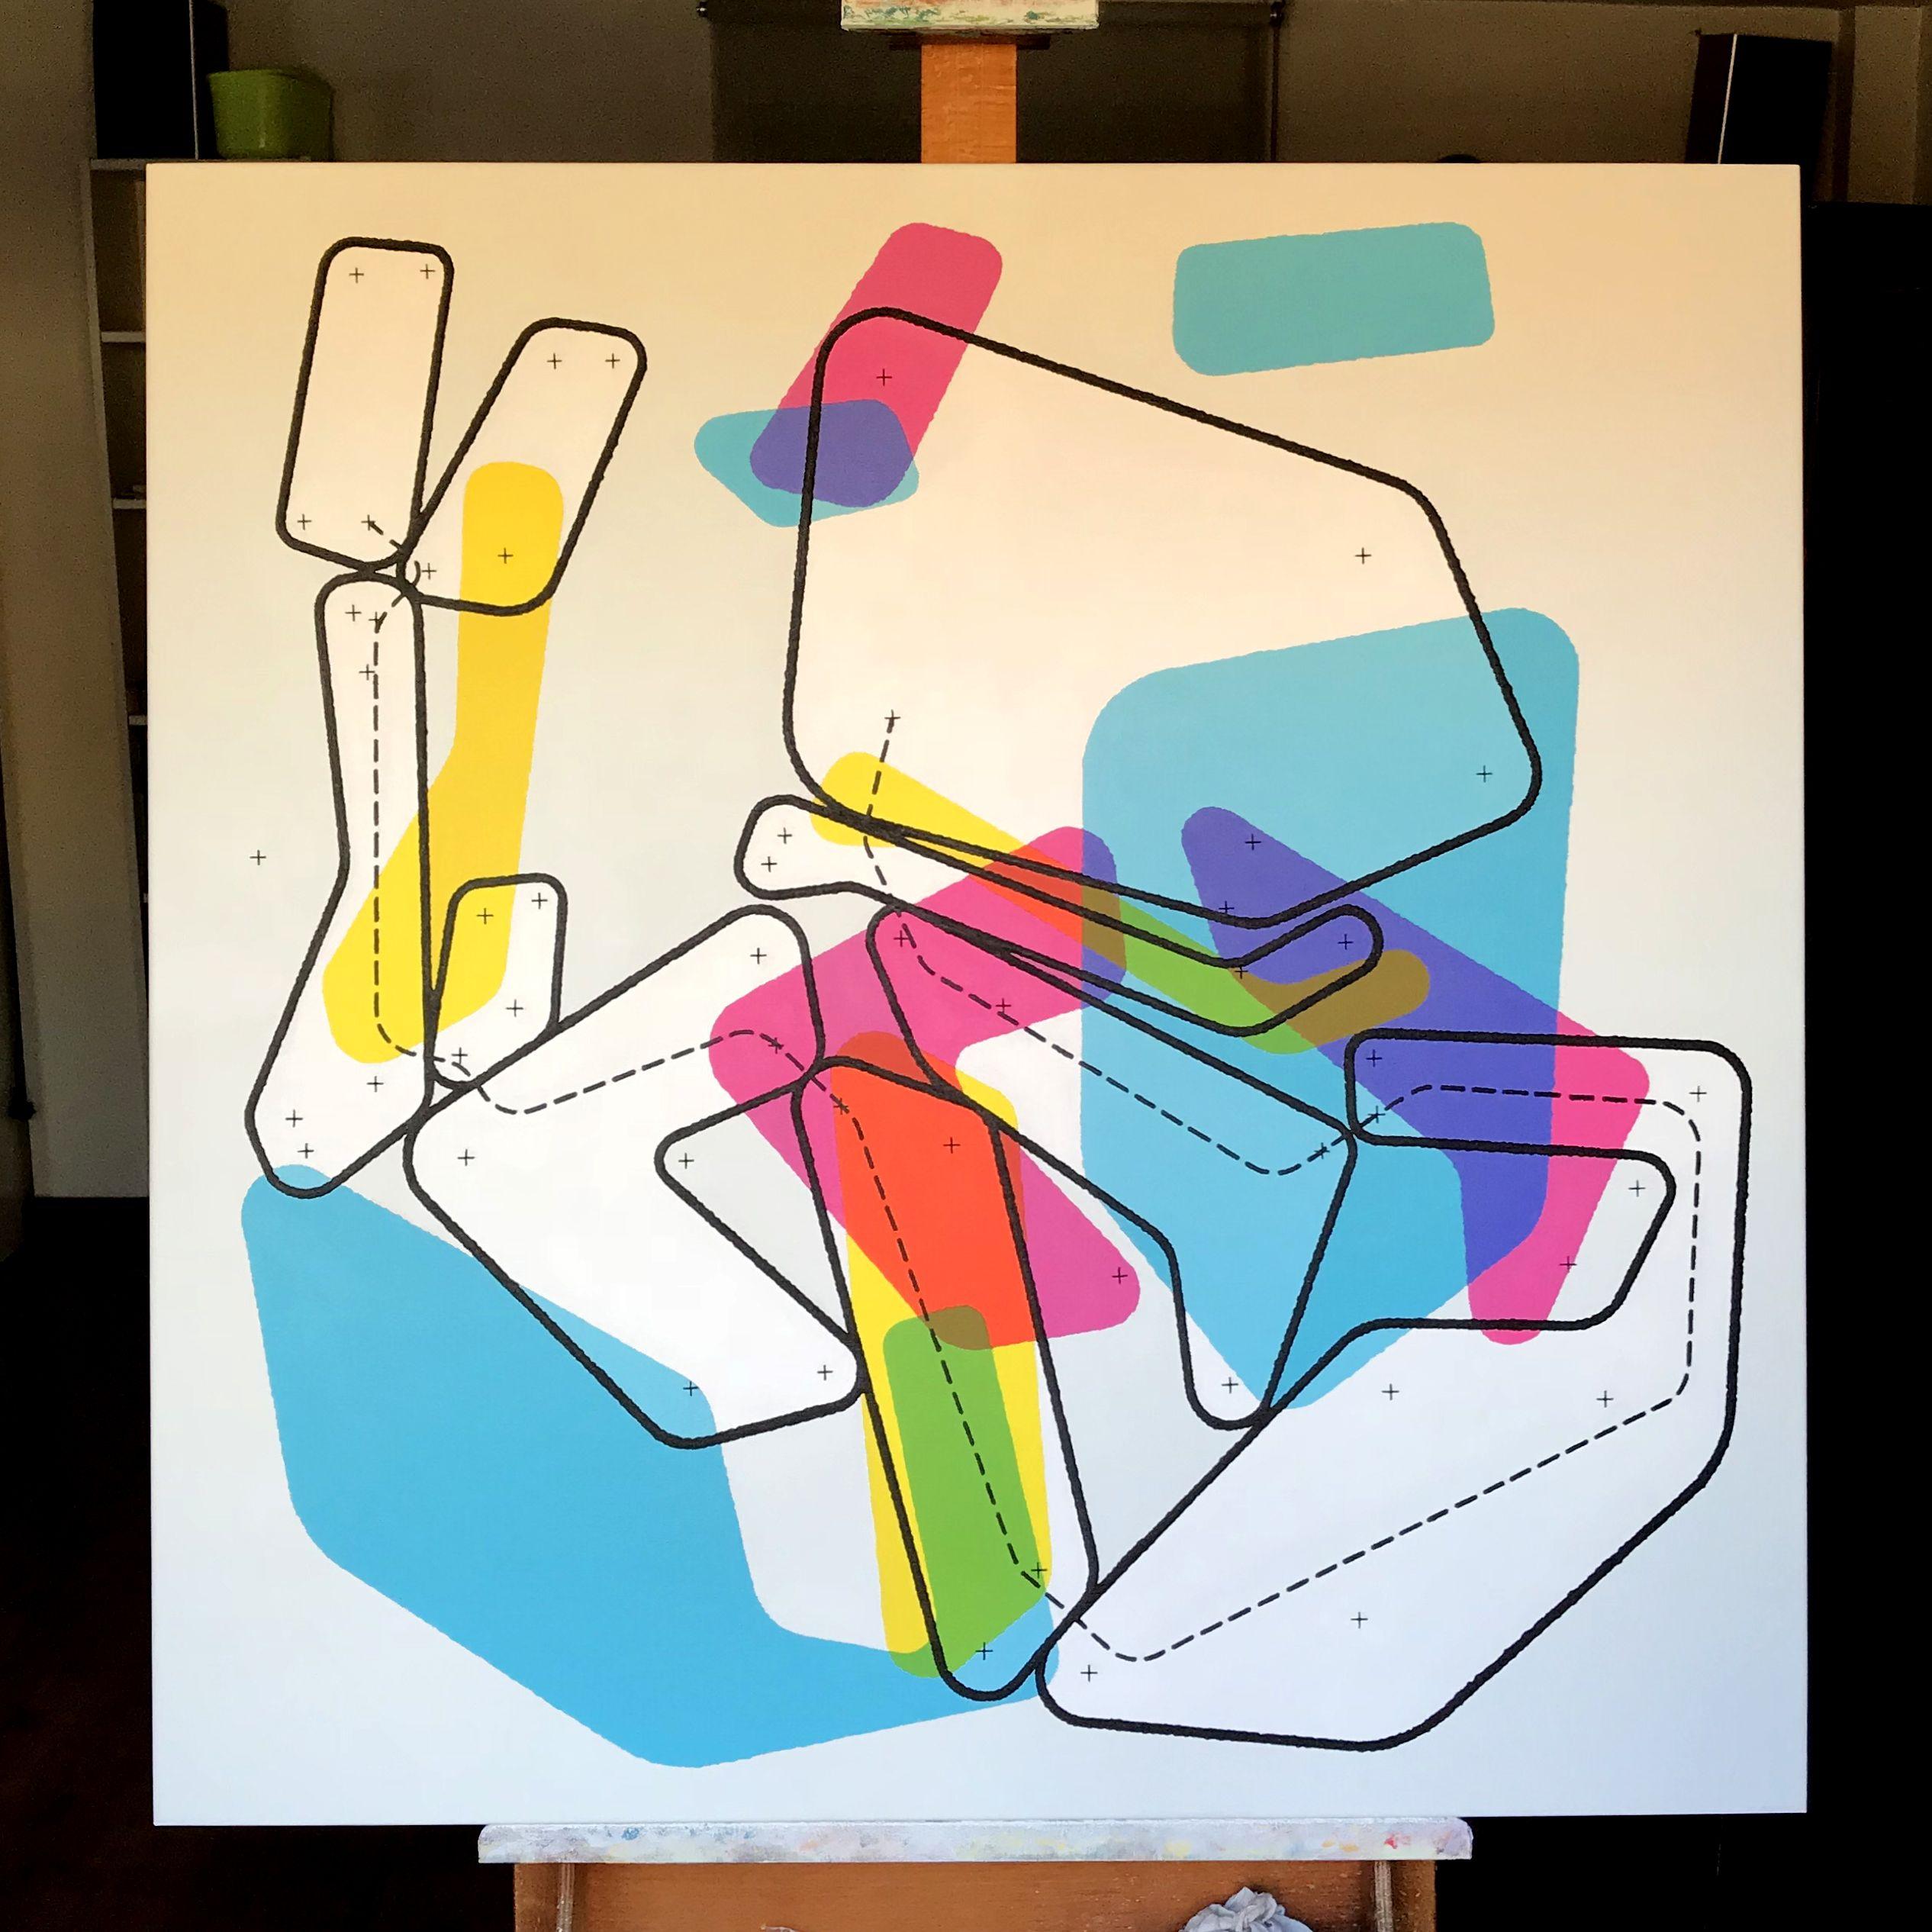 cmyk, Painting, Acrylic on Canvas - White Abstract Painting by boy droid